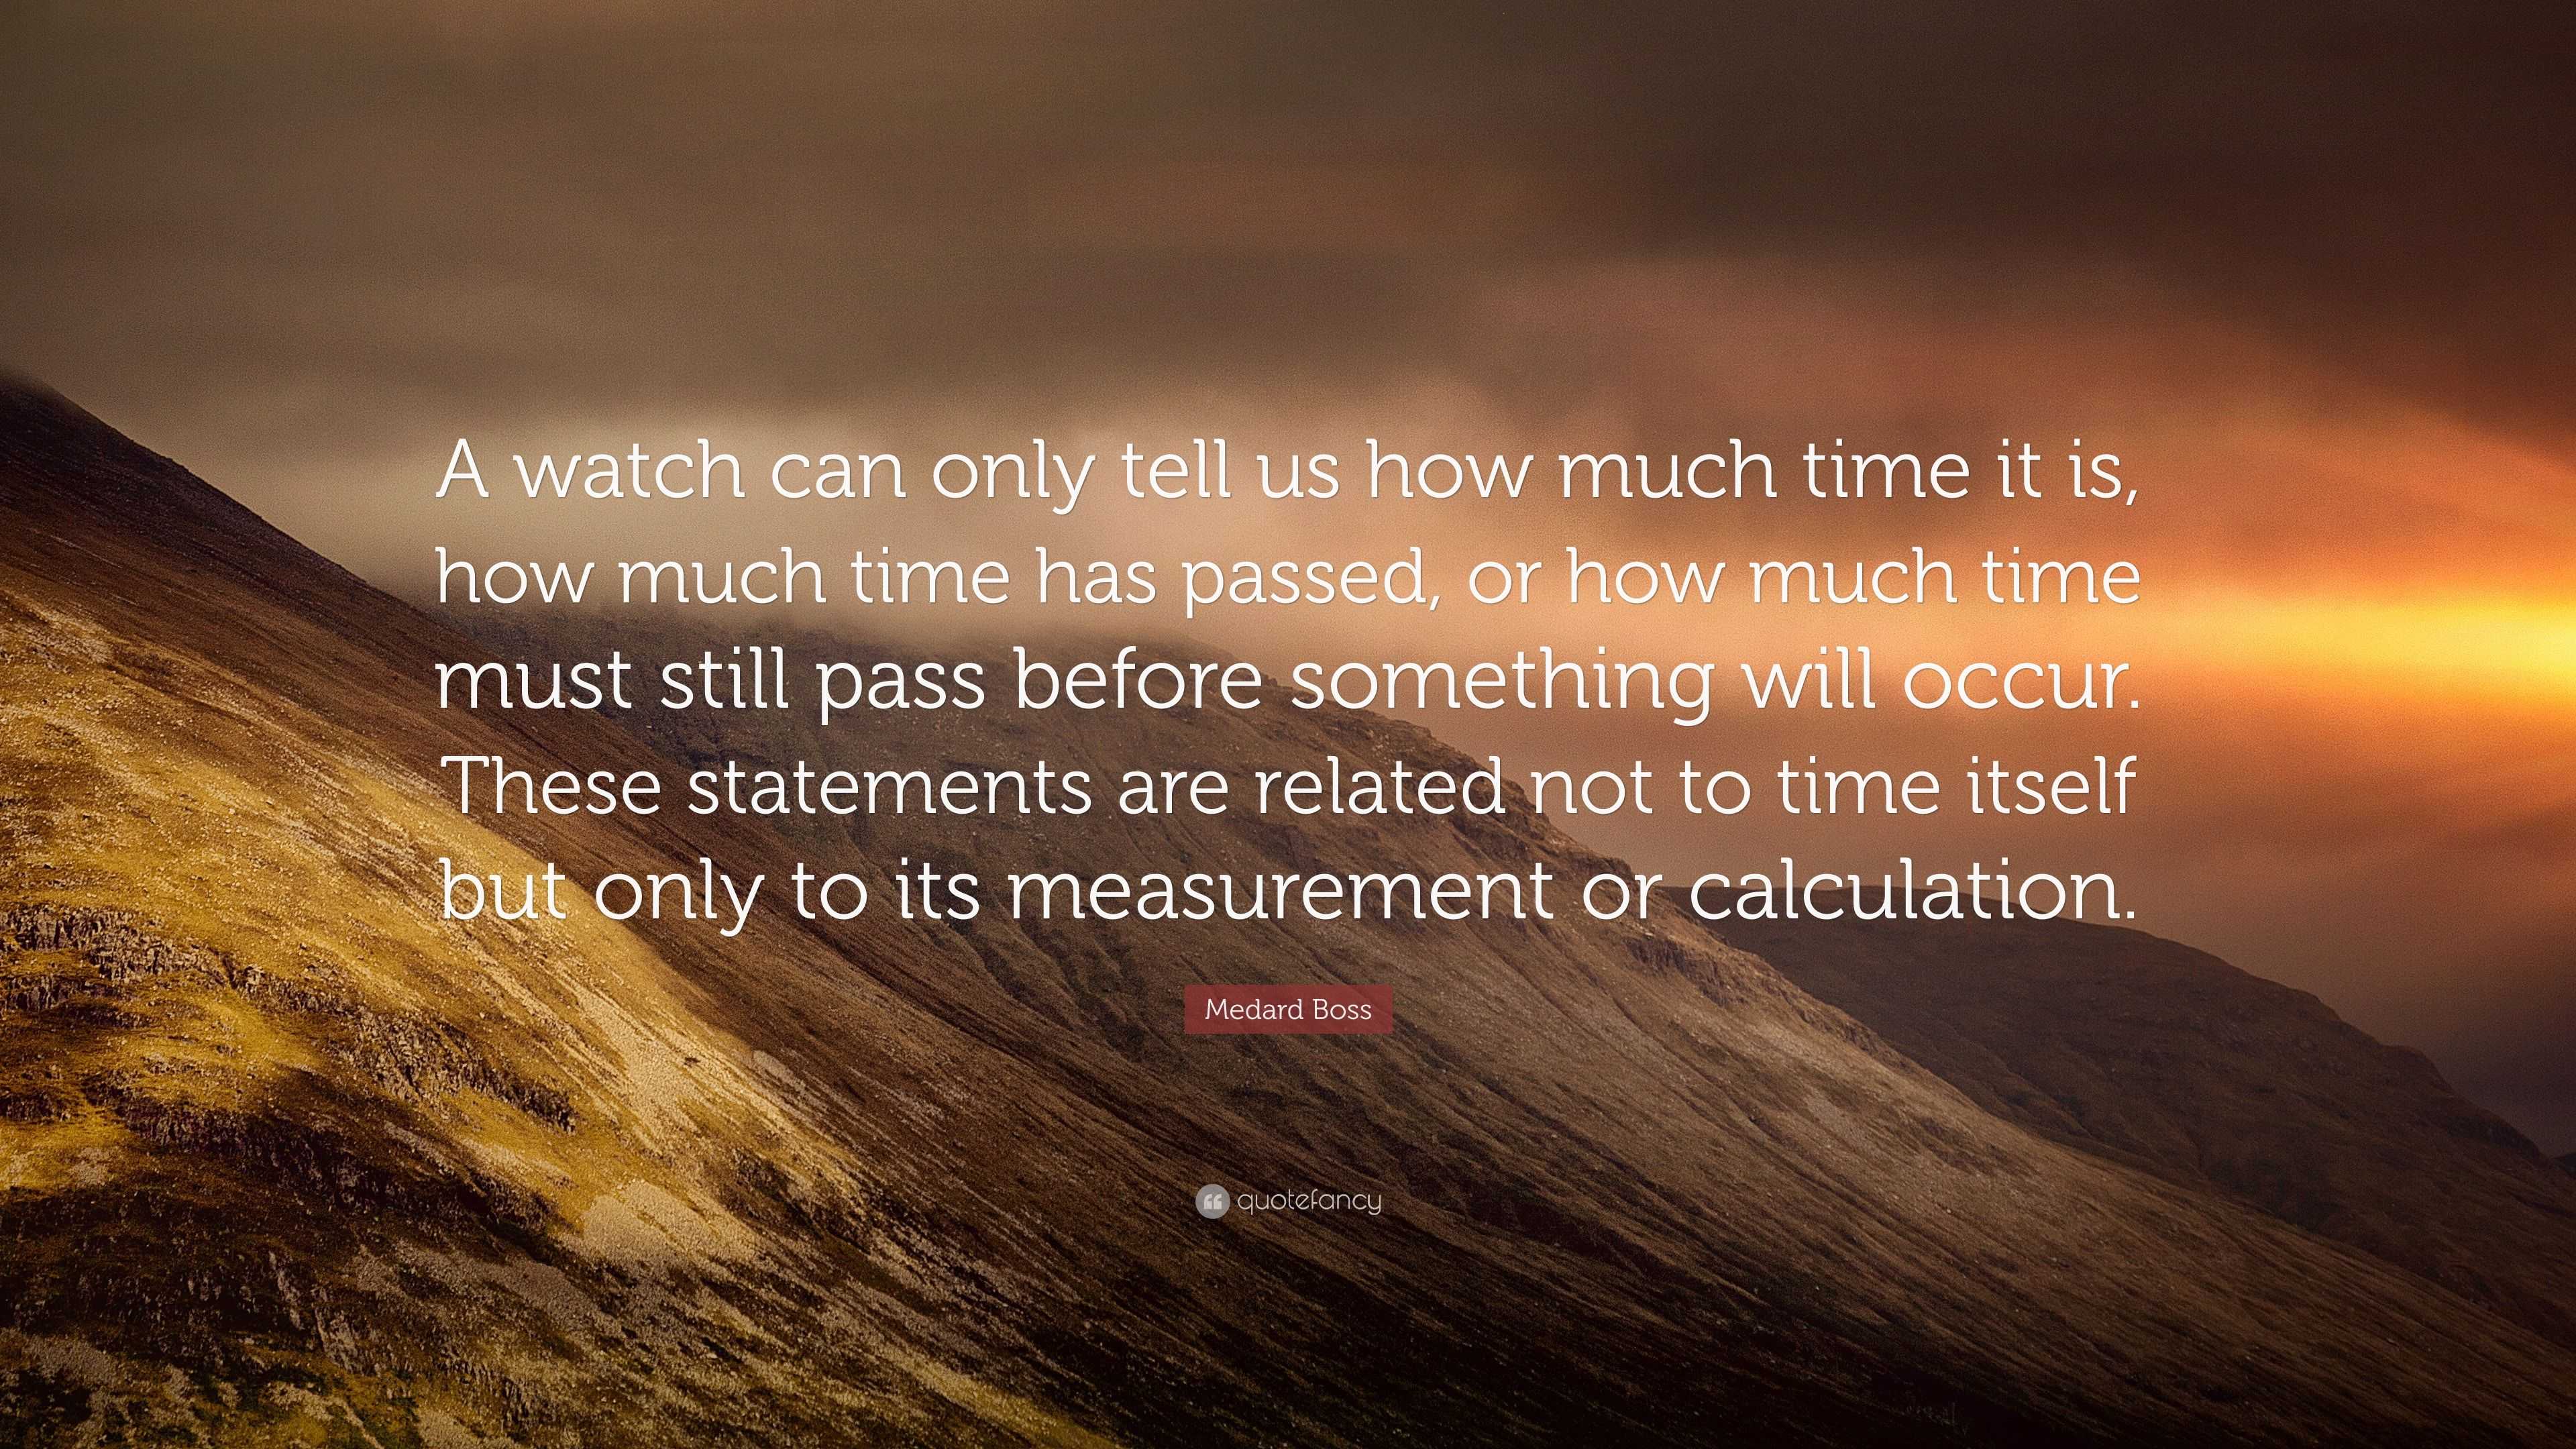 Medard Boss Quote: “A watch only tell how much time it is, how much time has passed, or how much time must still pass before somethin...”